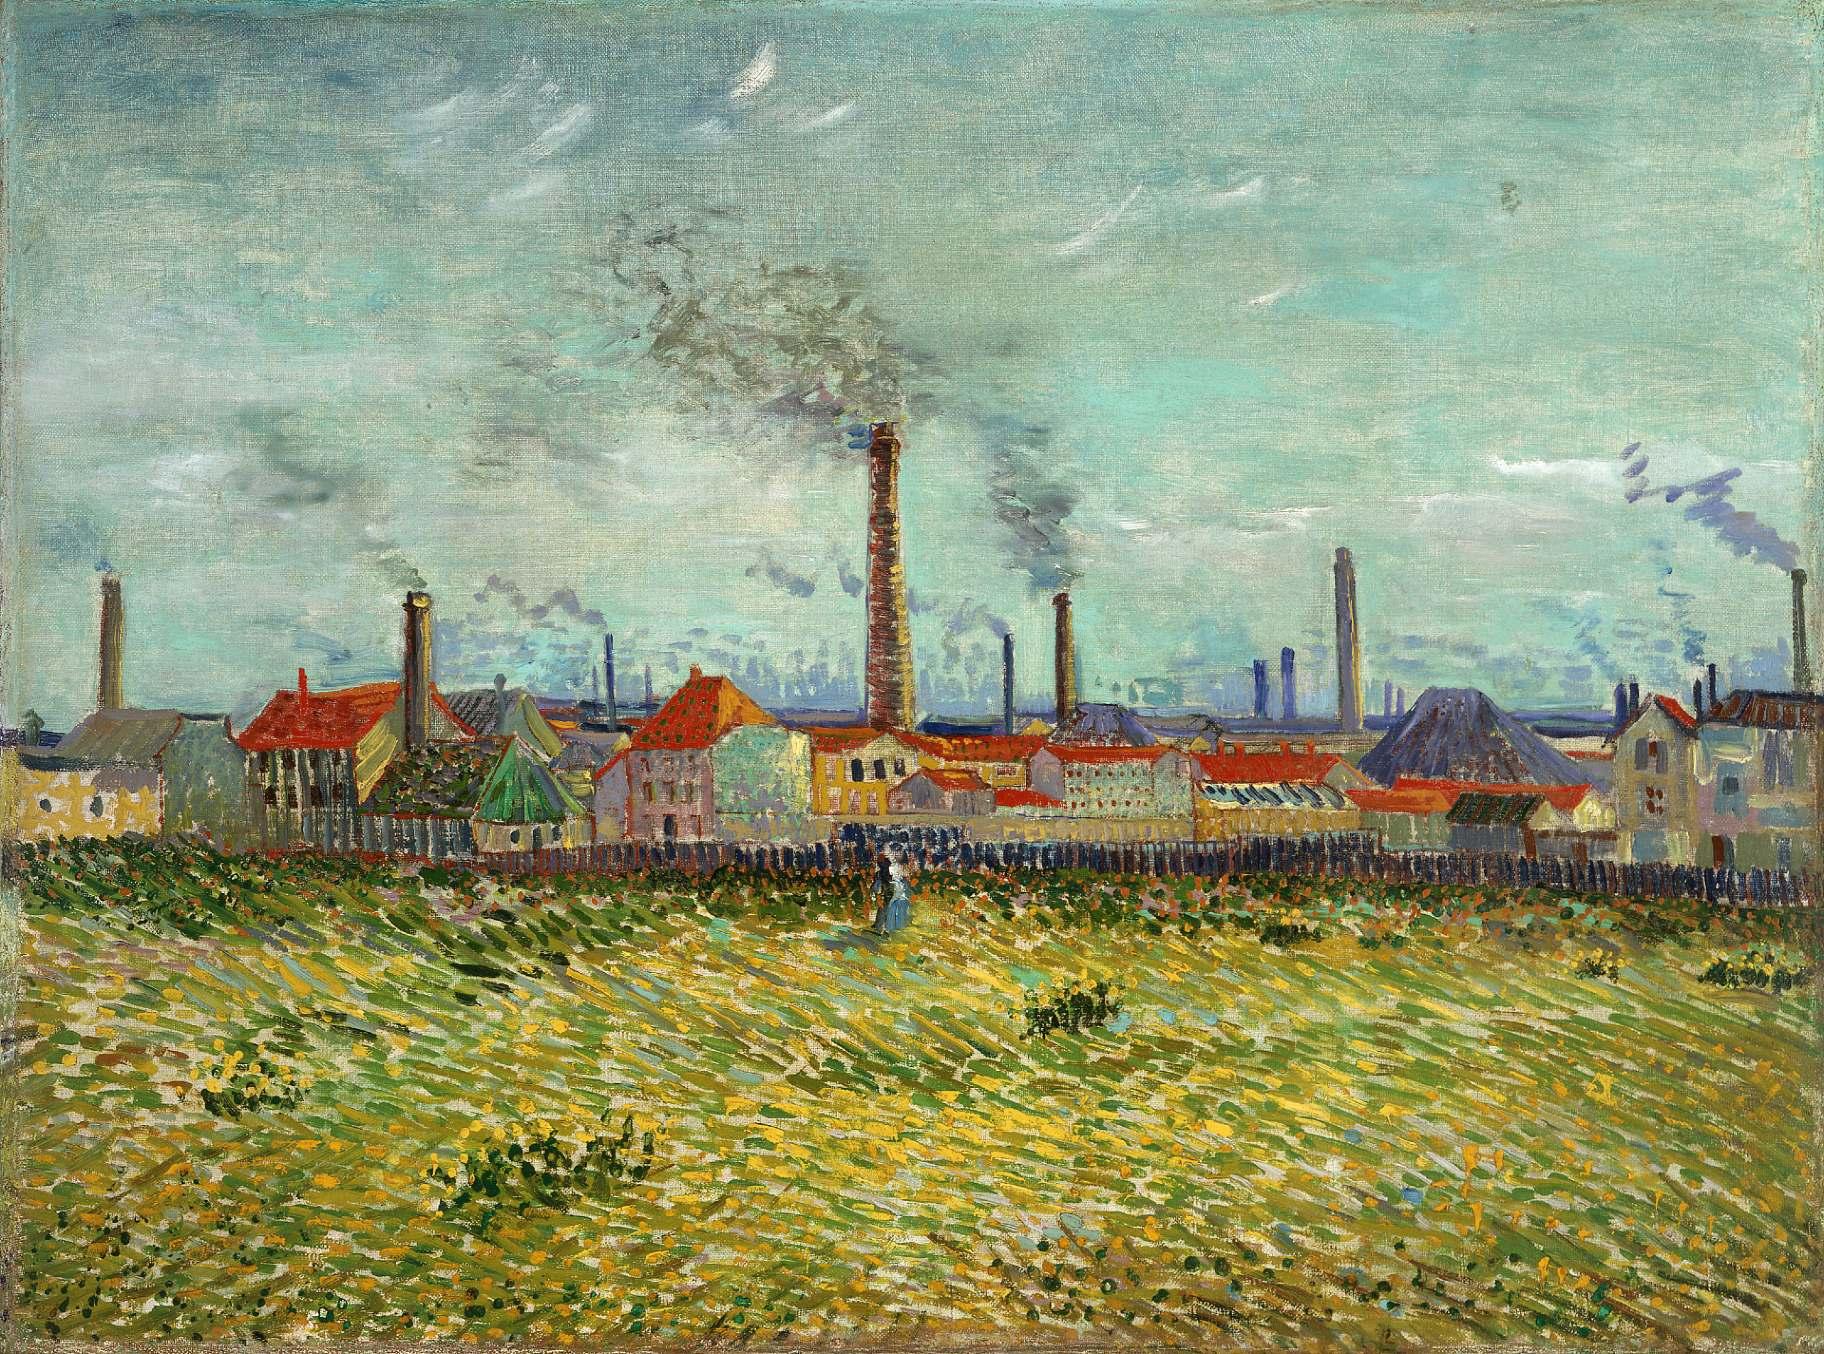 Vincent van Gogh. Factories at Clichy, 1887. Saint Louis Art Museum, Funds given by Mrs. Mark C. Steinberg by exchange 579:1958. (Courtesy of Art Institute of Chicago)